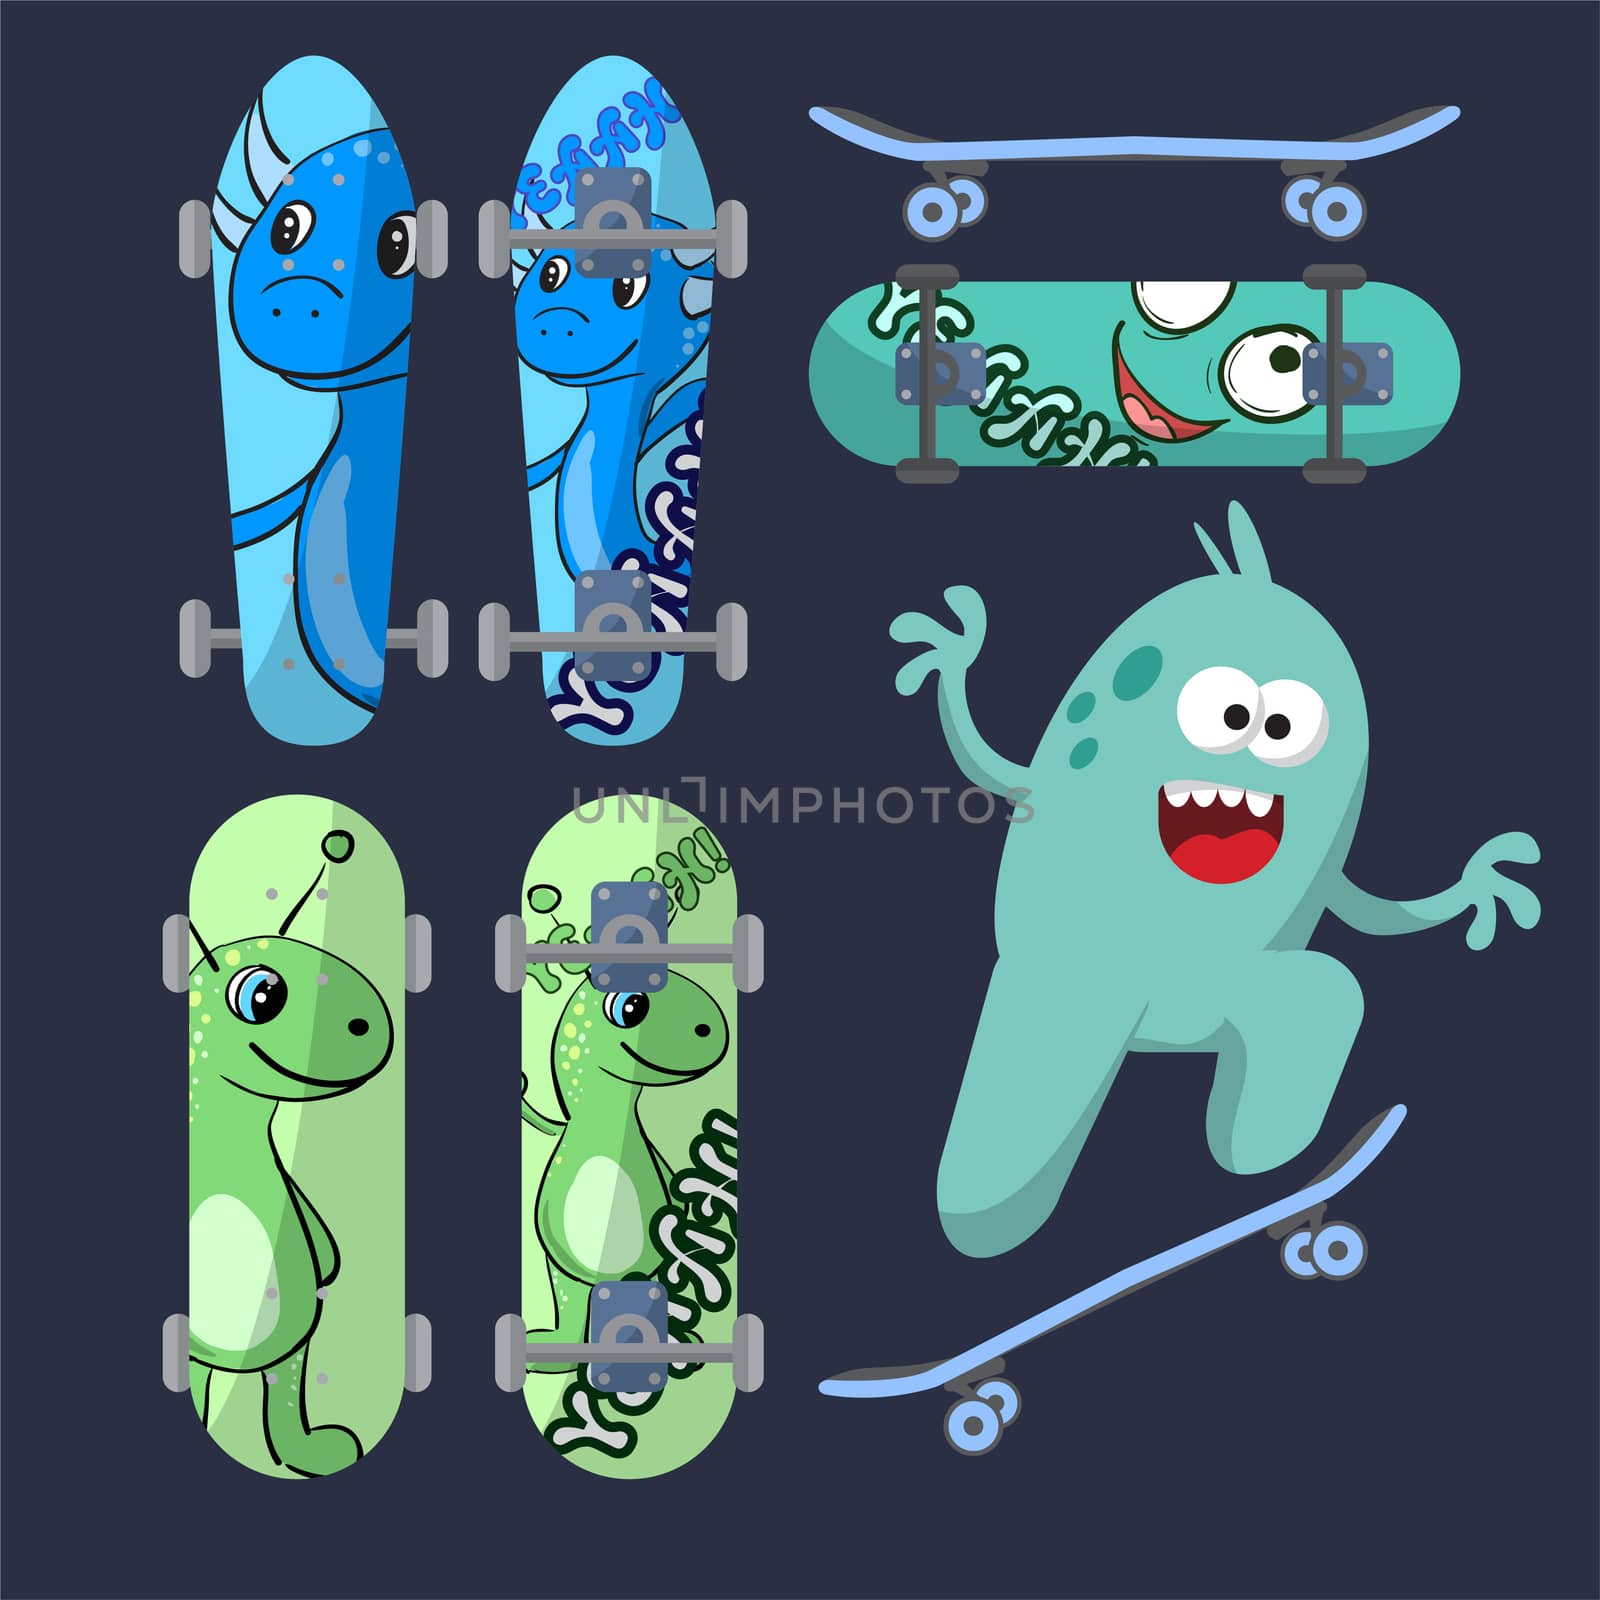 Bright skateboard on a dark background with a cheerful light green monster. illustration